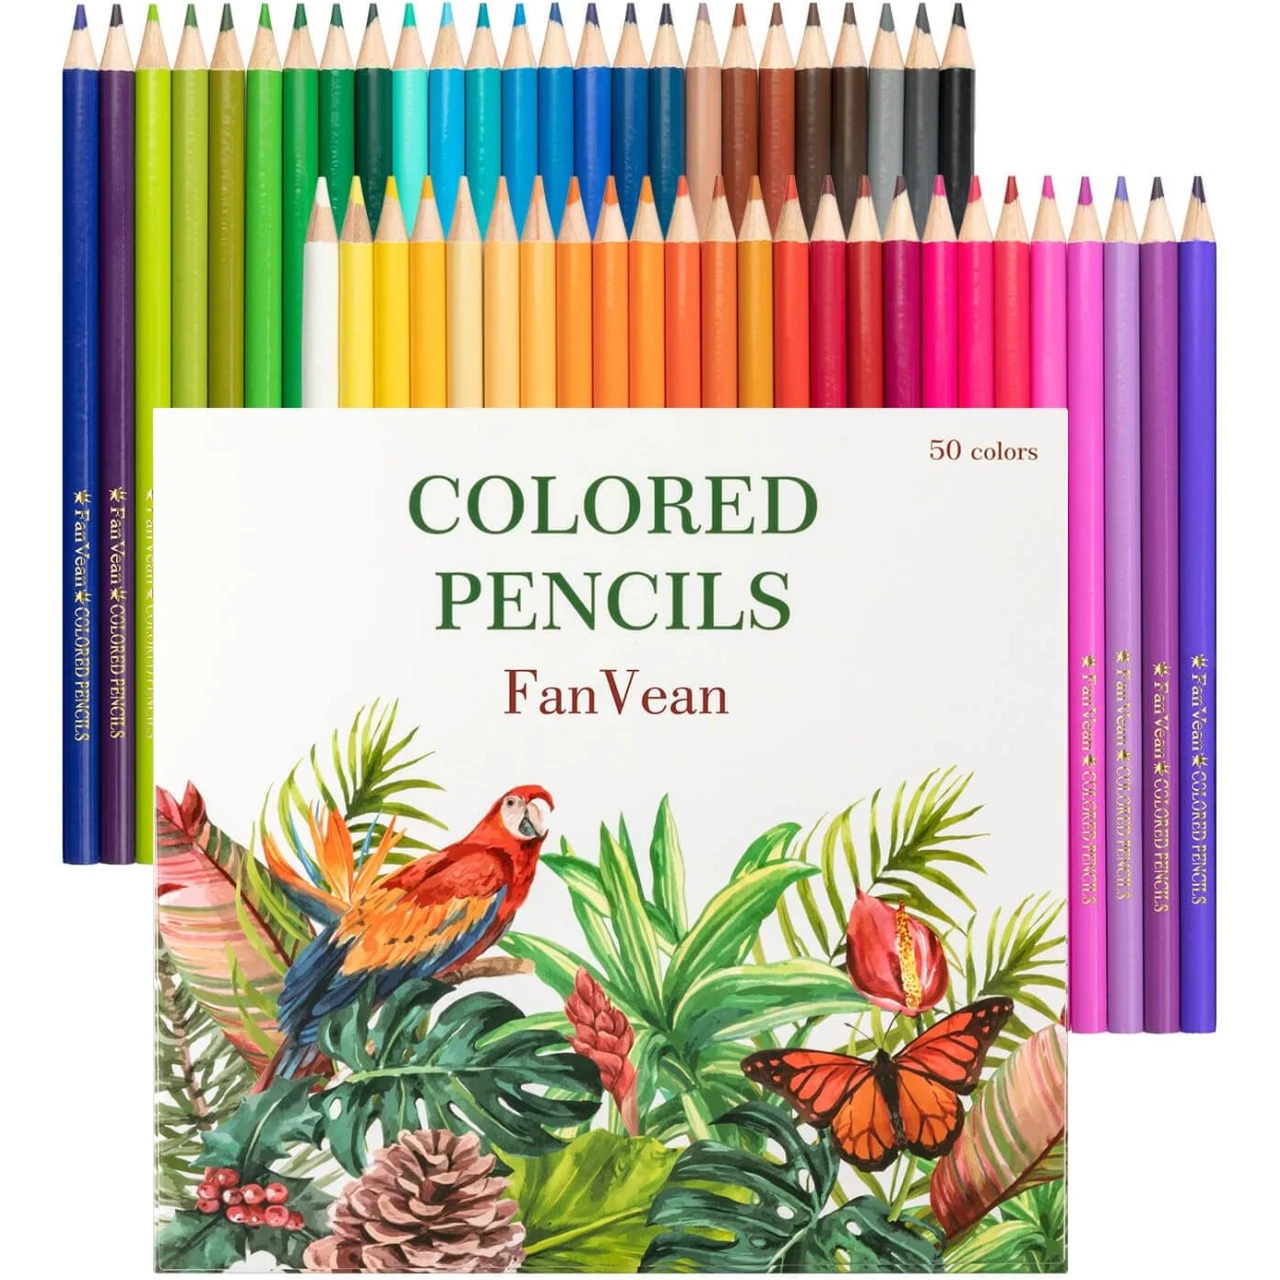 FanVean Colored Pencils Color Pencil Set for adult Coloring book Gifts for kids &amp; Adults 50 count